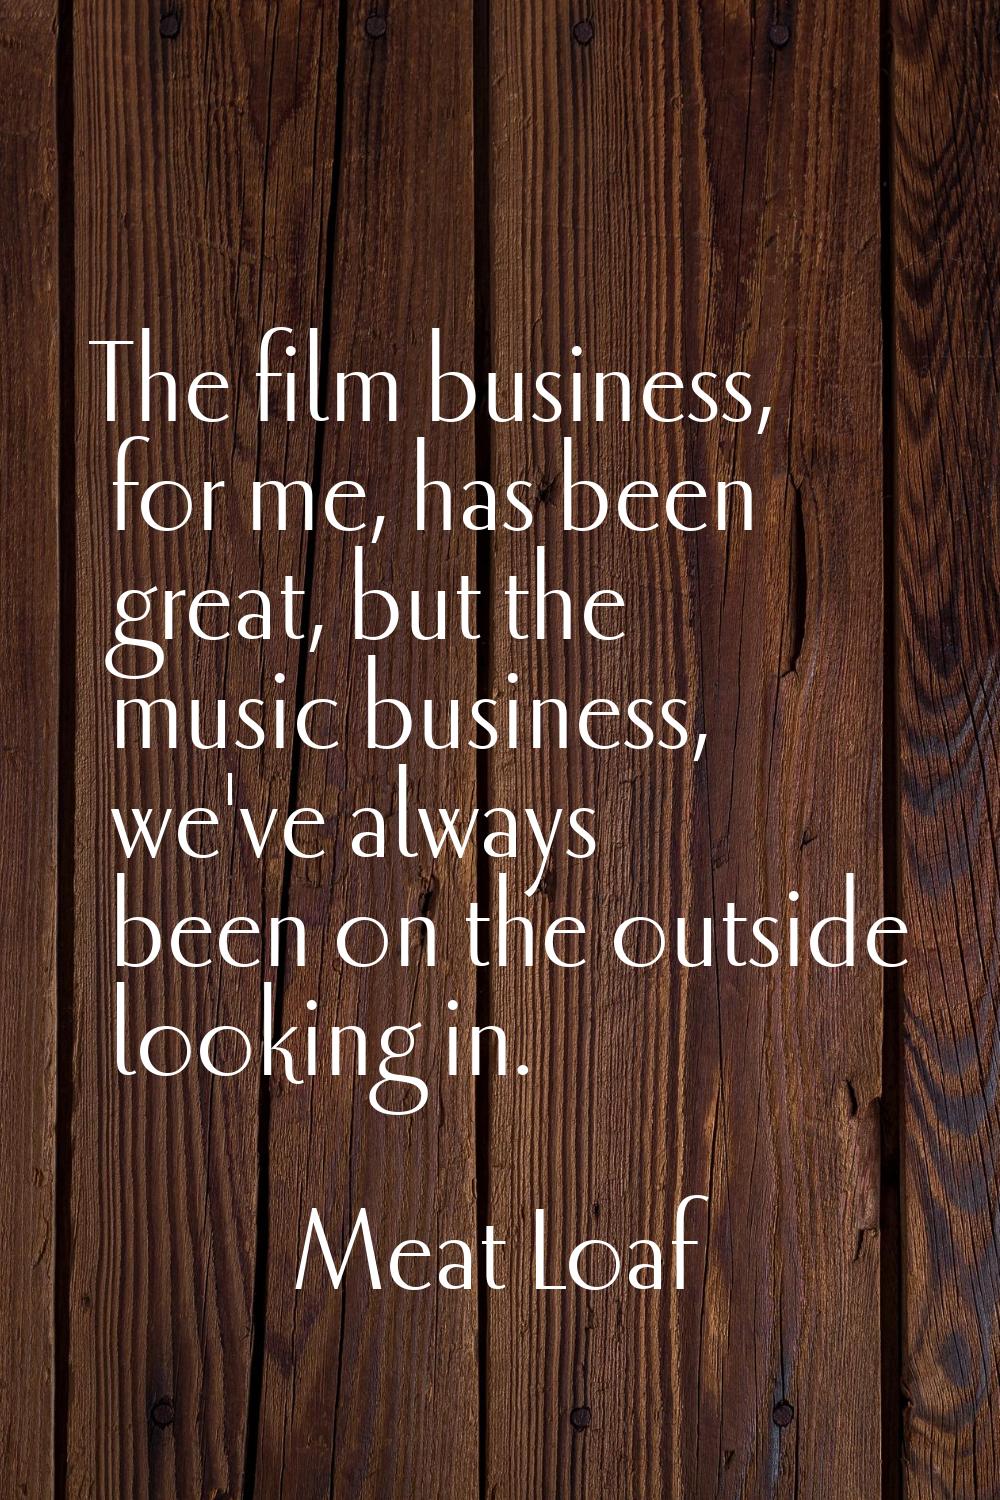 The film business, for me, has been great, but the music business, we've always been on the outside